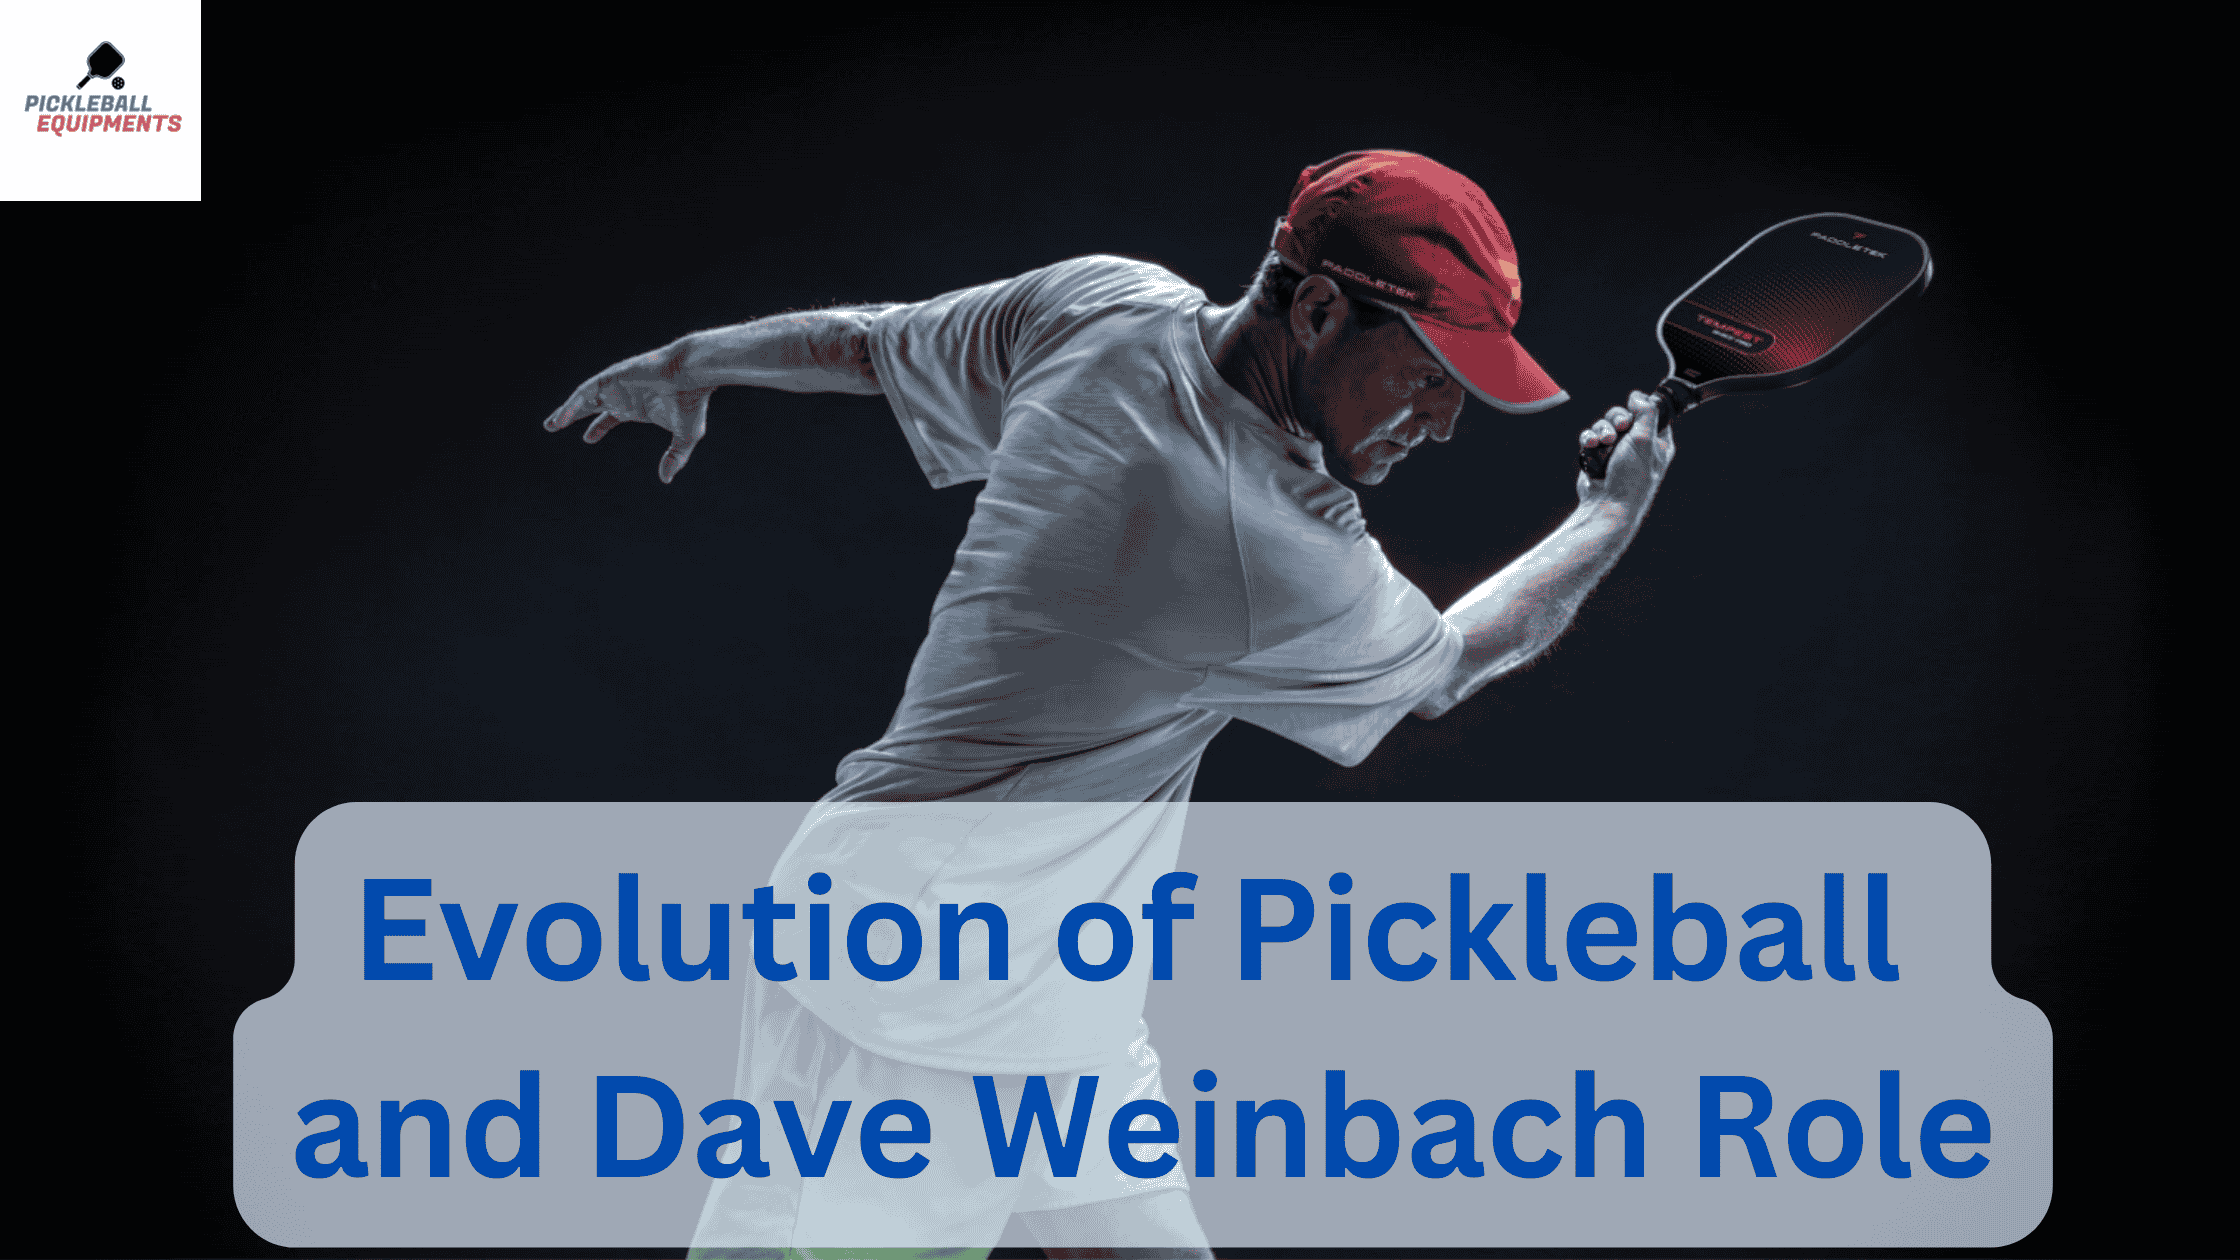 Evolution of Pickleball and Dave Weinbach Role